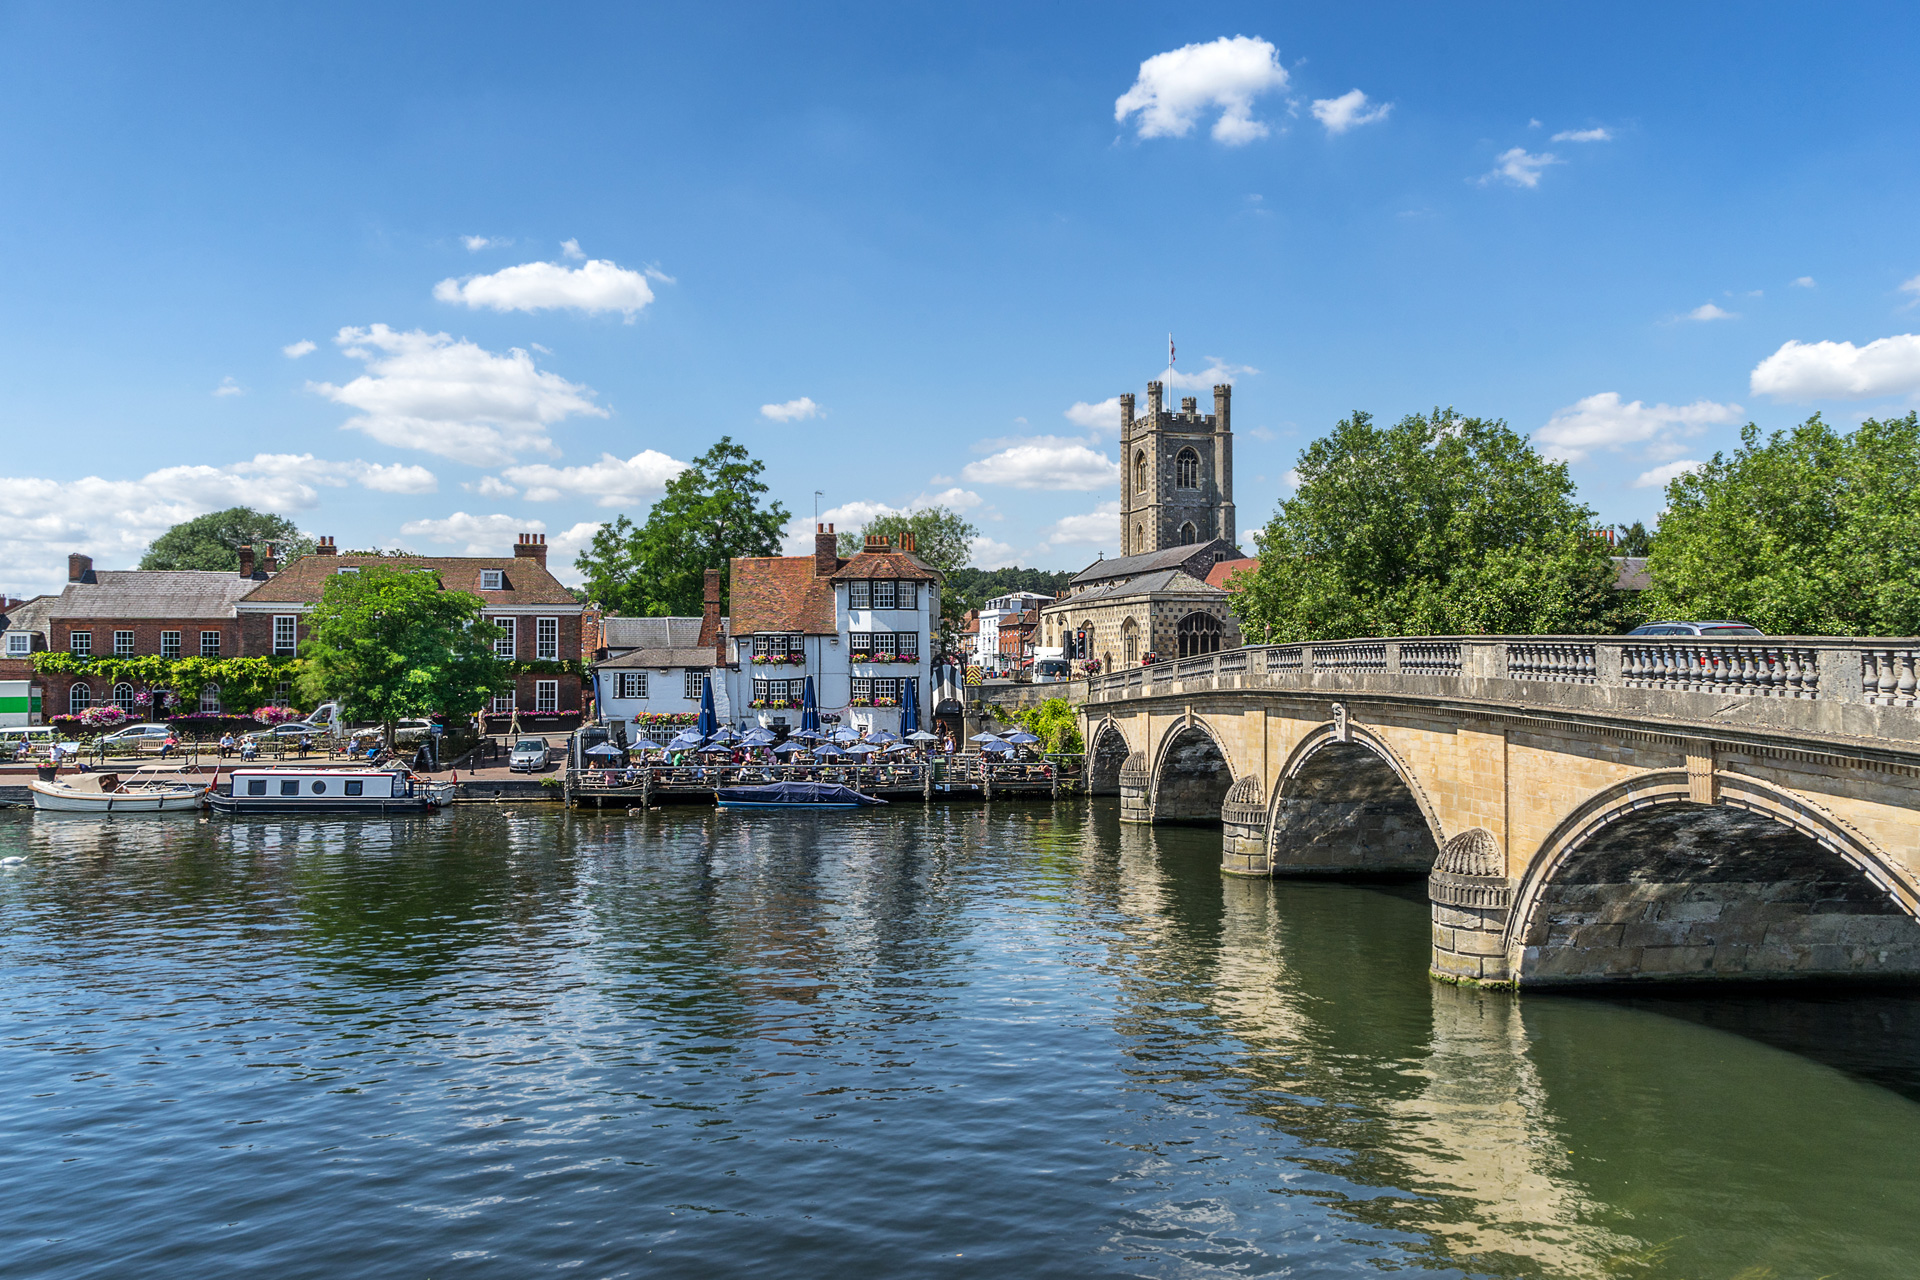 The river in Henley on Thames